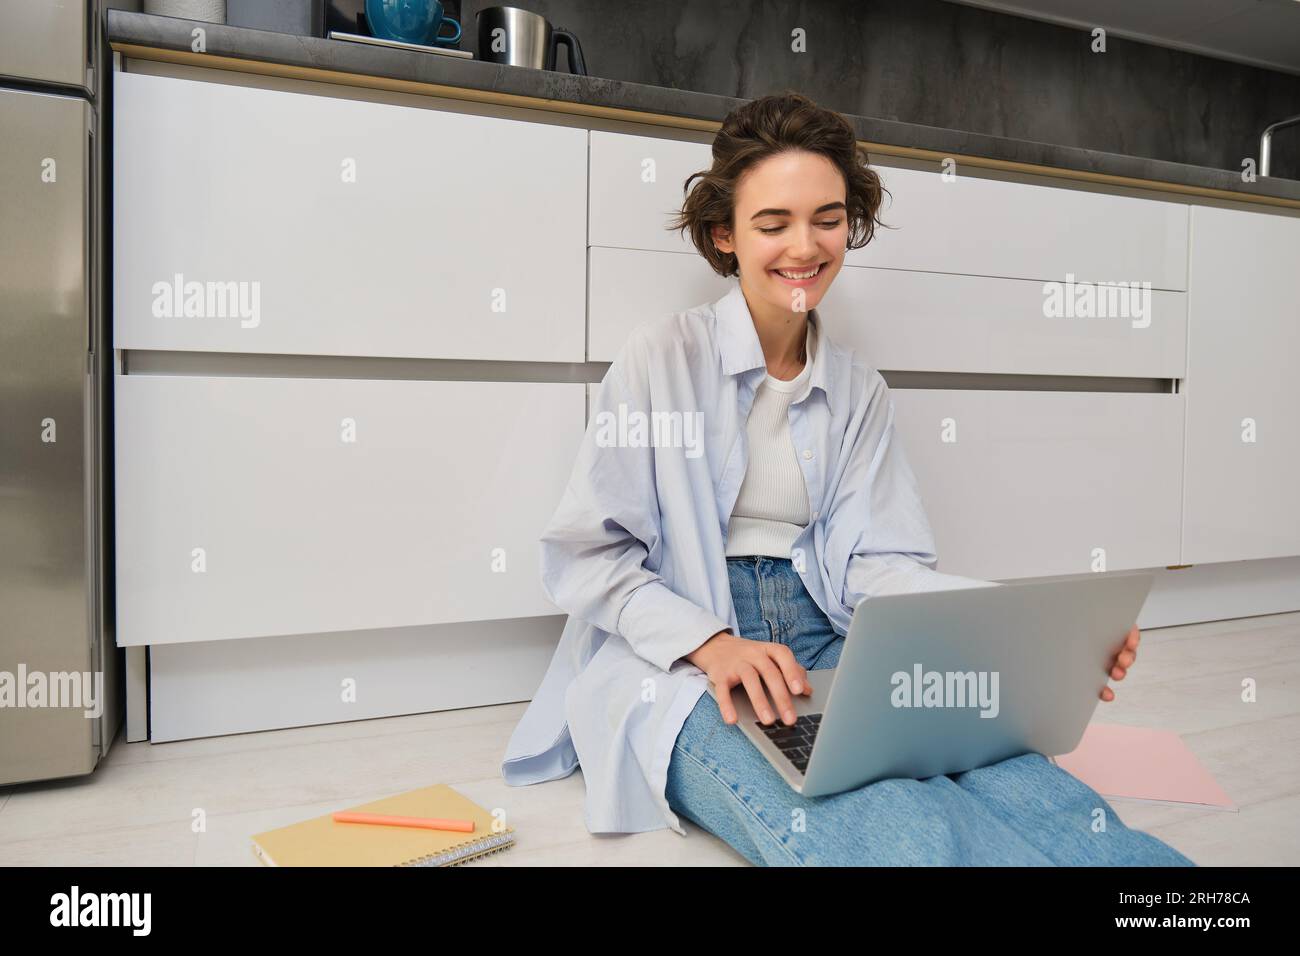 Portrait of young woman using laptop, sitting on kitchen floor, doing her homework, online chatting with friends on computer. Stock Photo